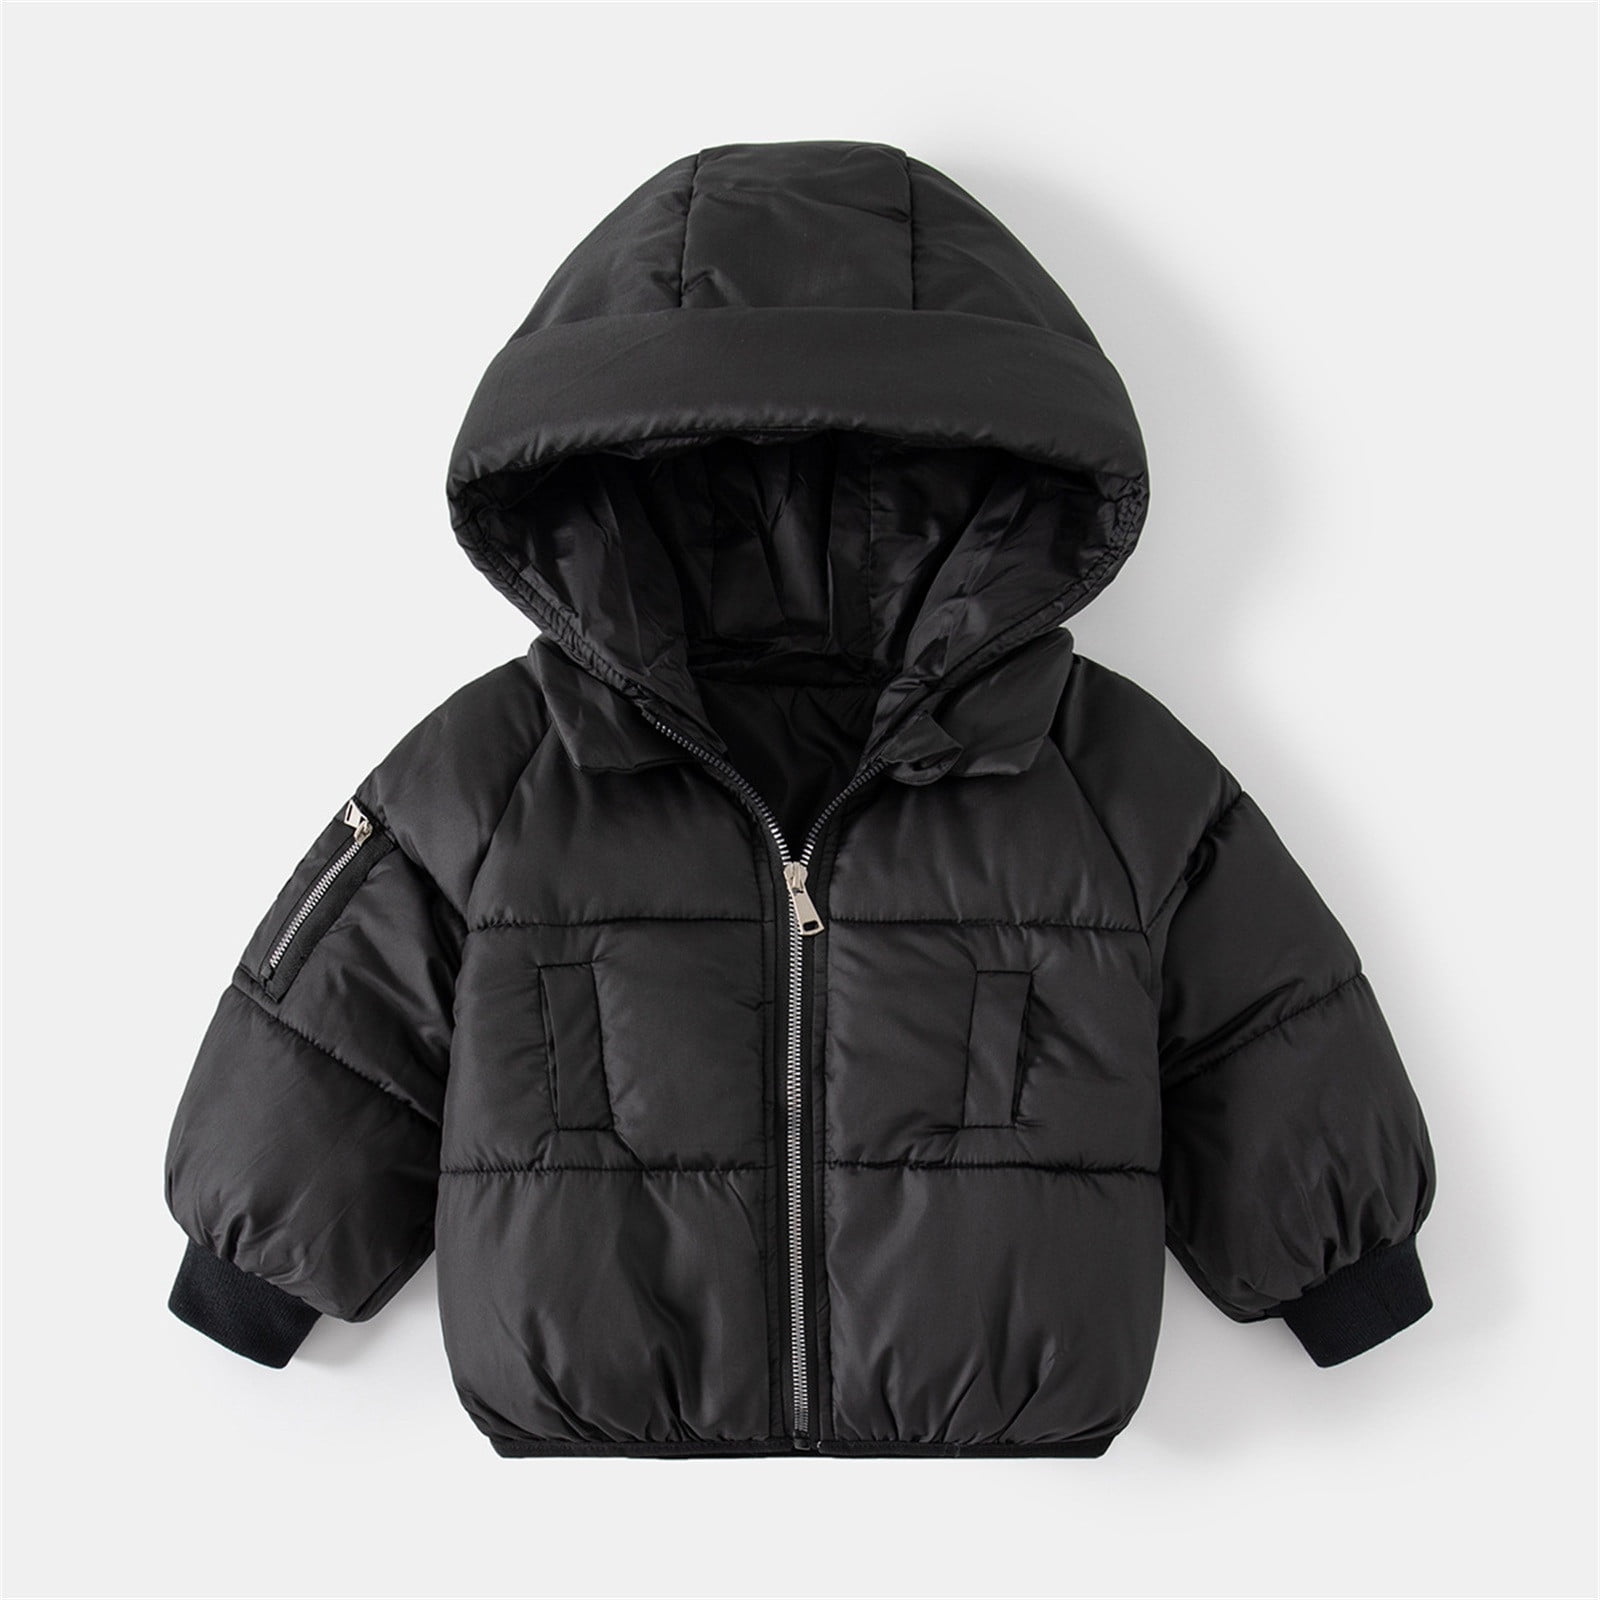 Aayomet Coats For Boys Warm Winter Coat Water Resistant Soft Hooded ...